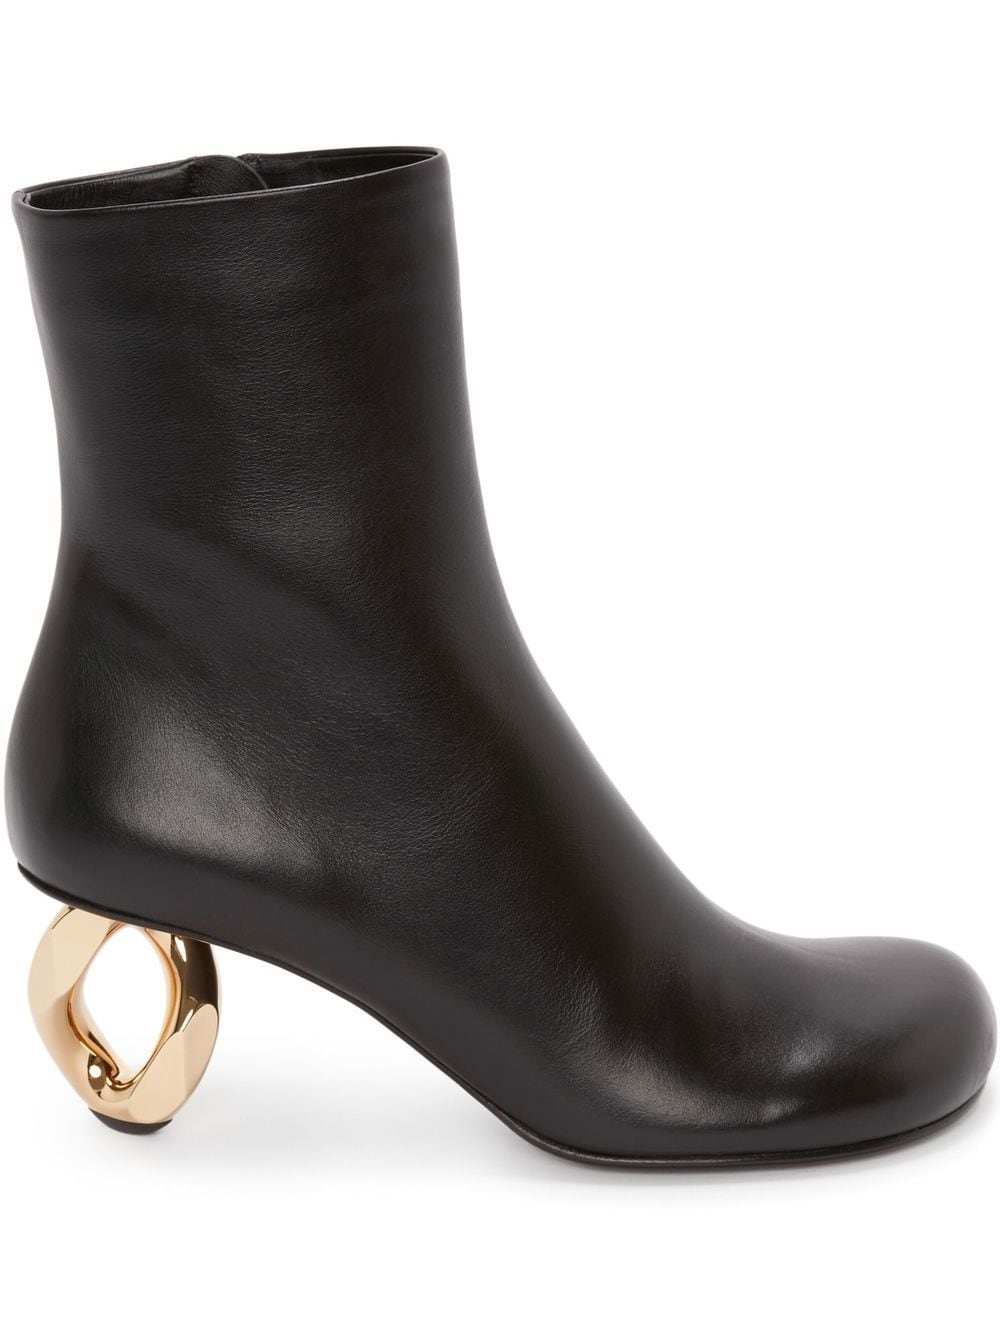 Image 1 of JW Anderson Chain mid-heel boots